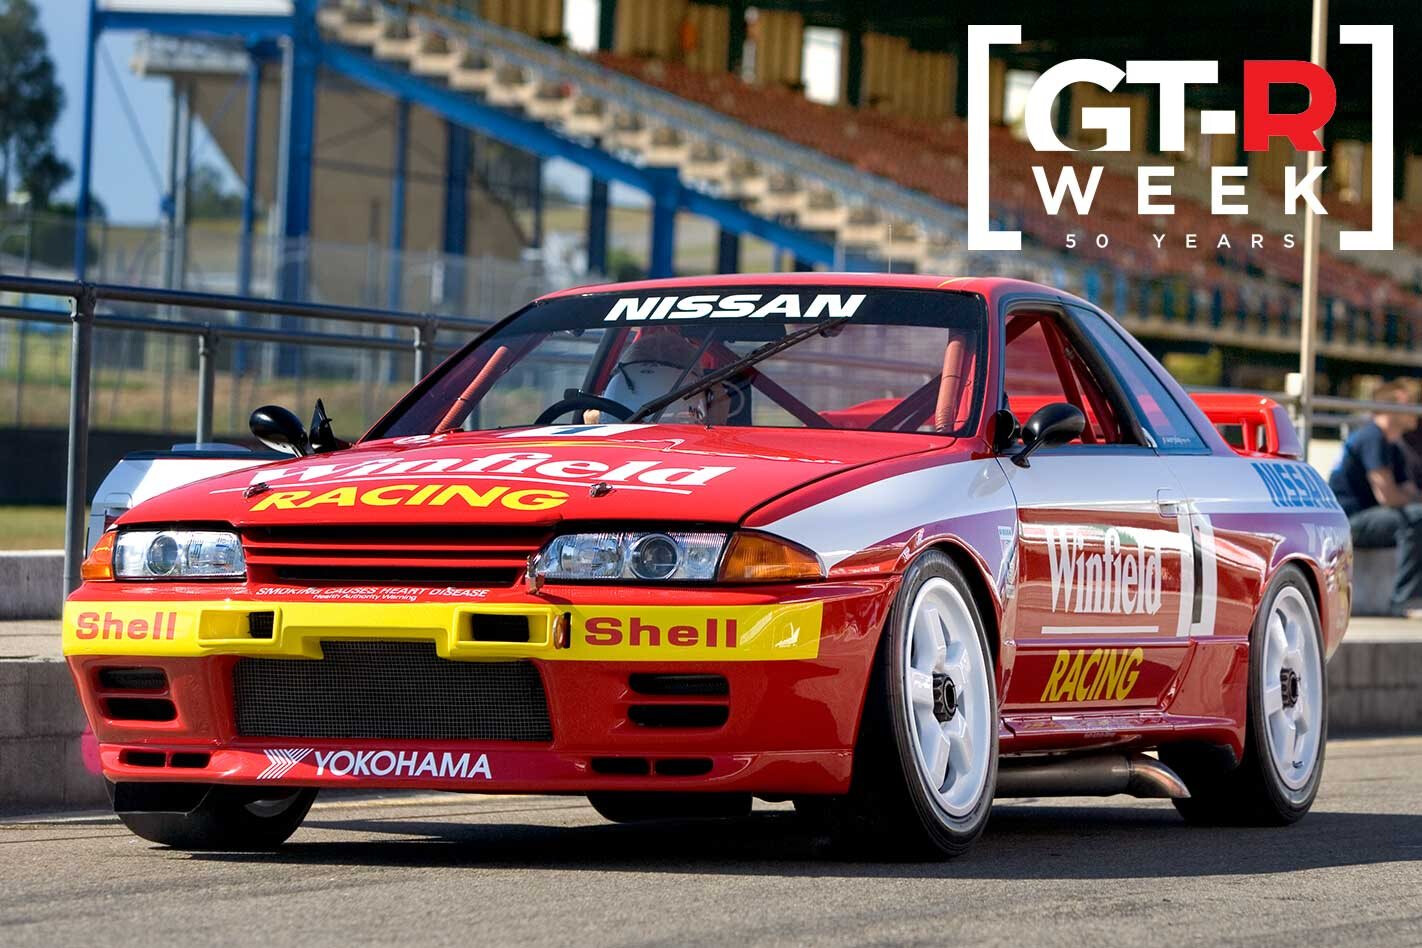 The Australians Behind The Nissan R32 Skyline Gt R Group A Success 50 Years Of Gt R